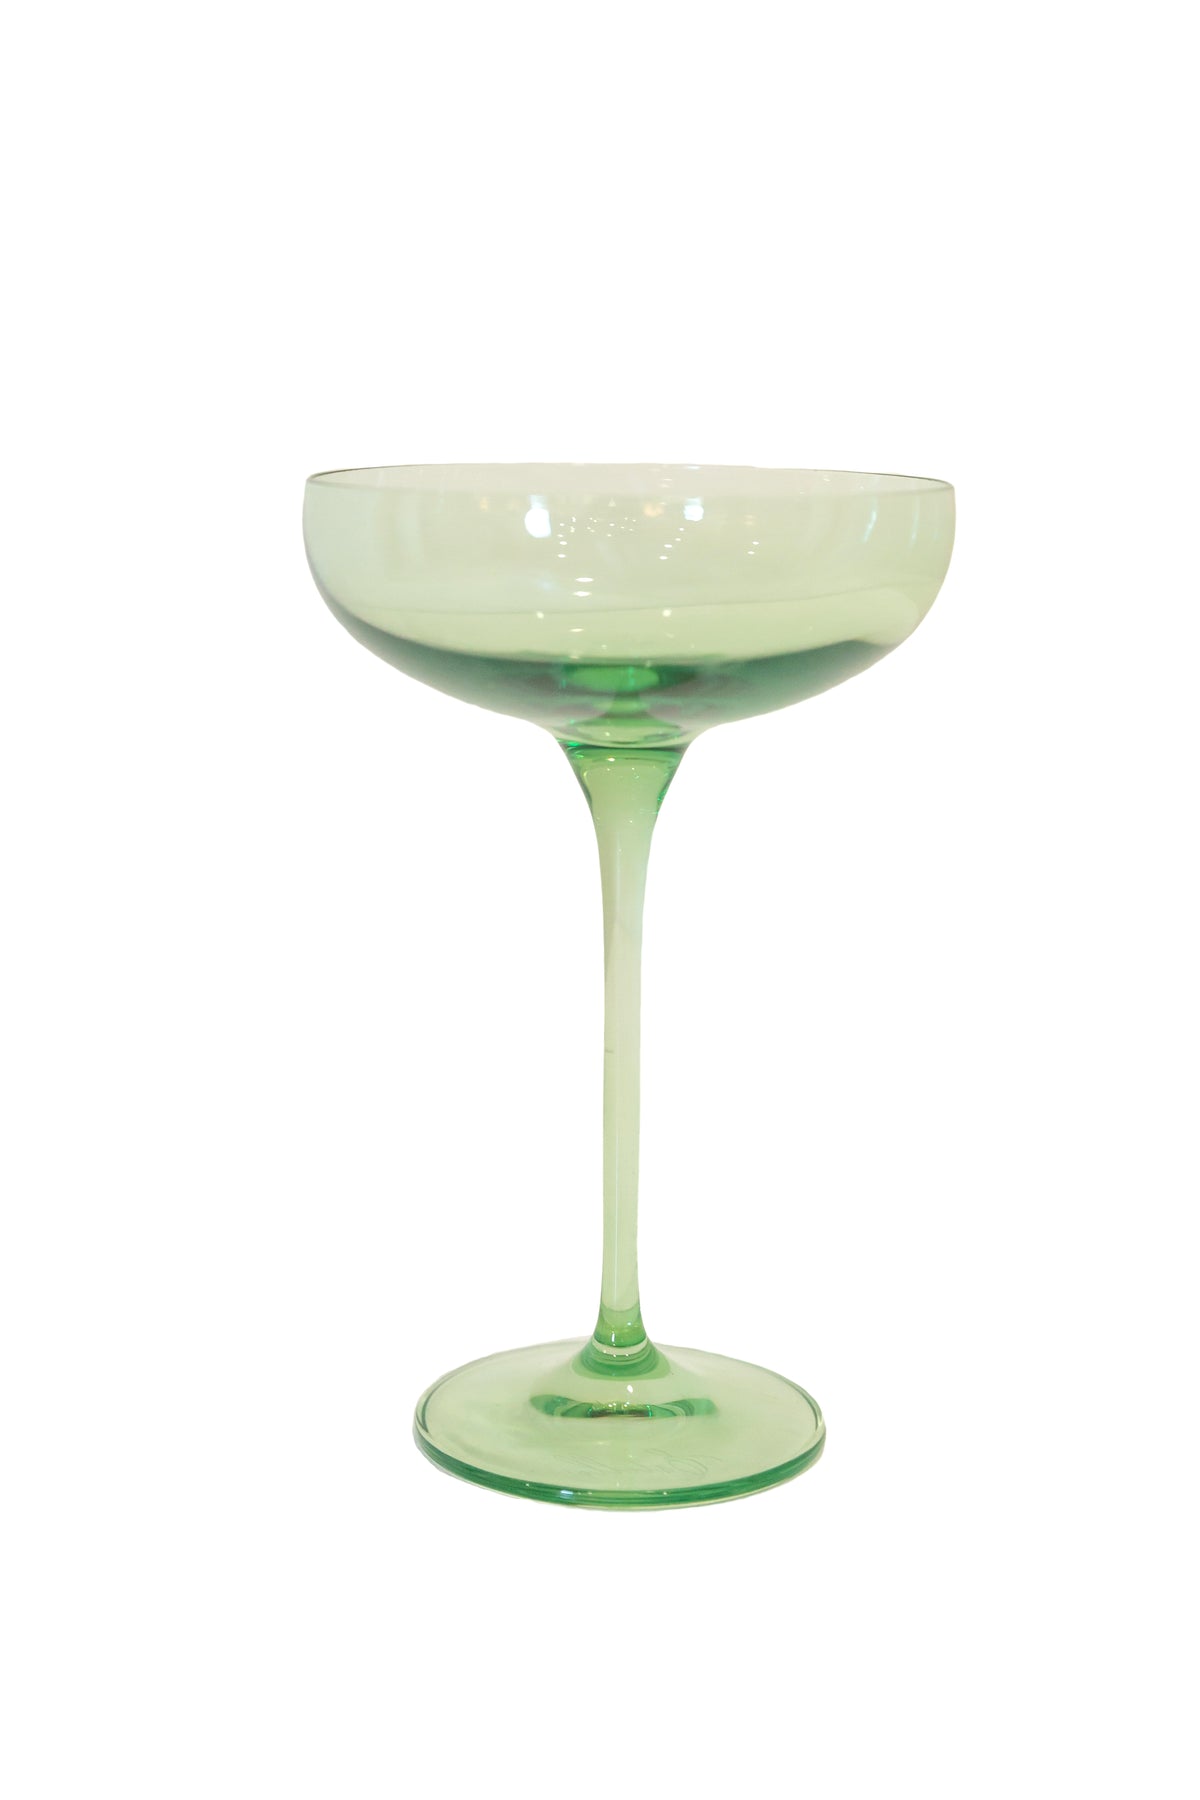 Champagne Coupe Stemware, Set of 6 Mint Green